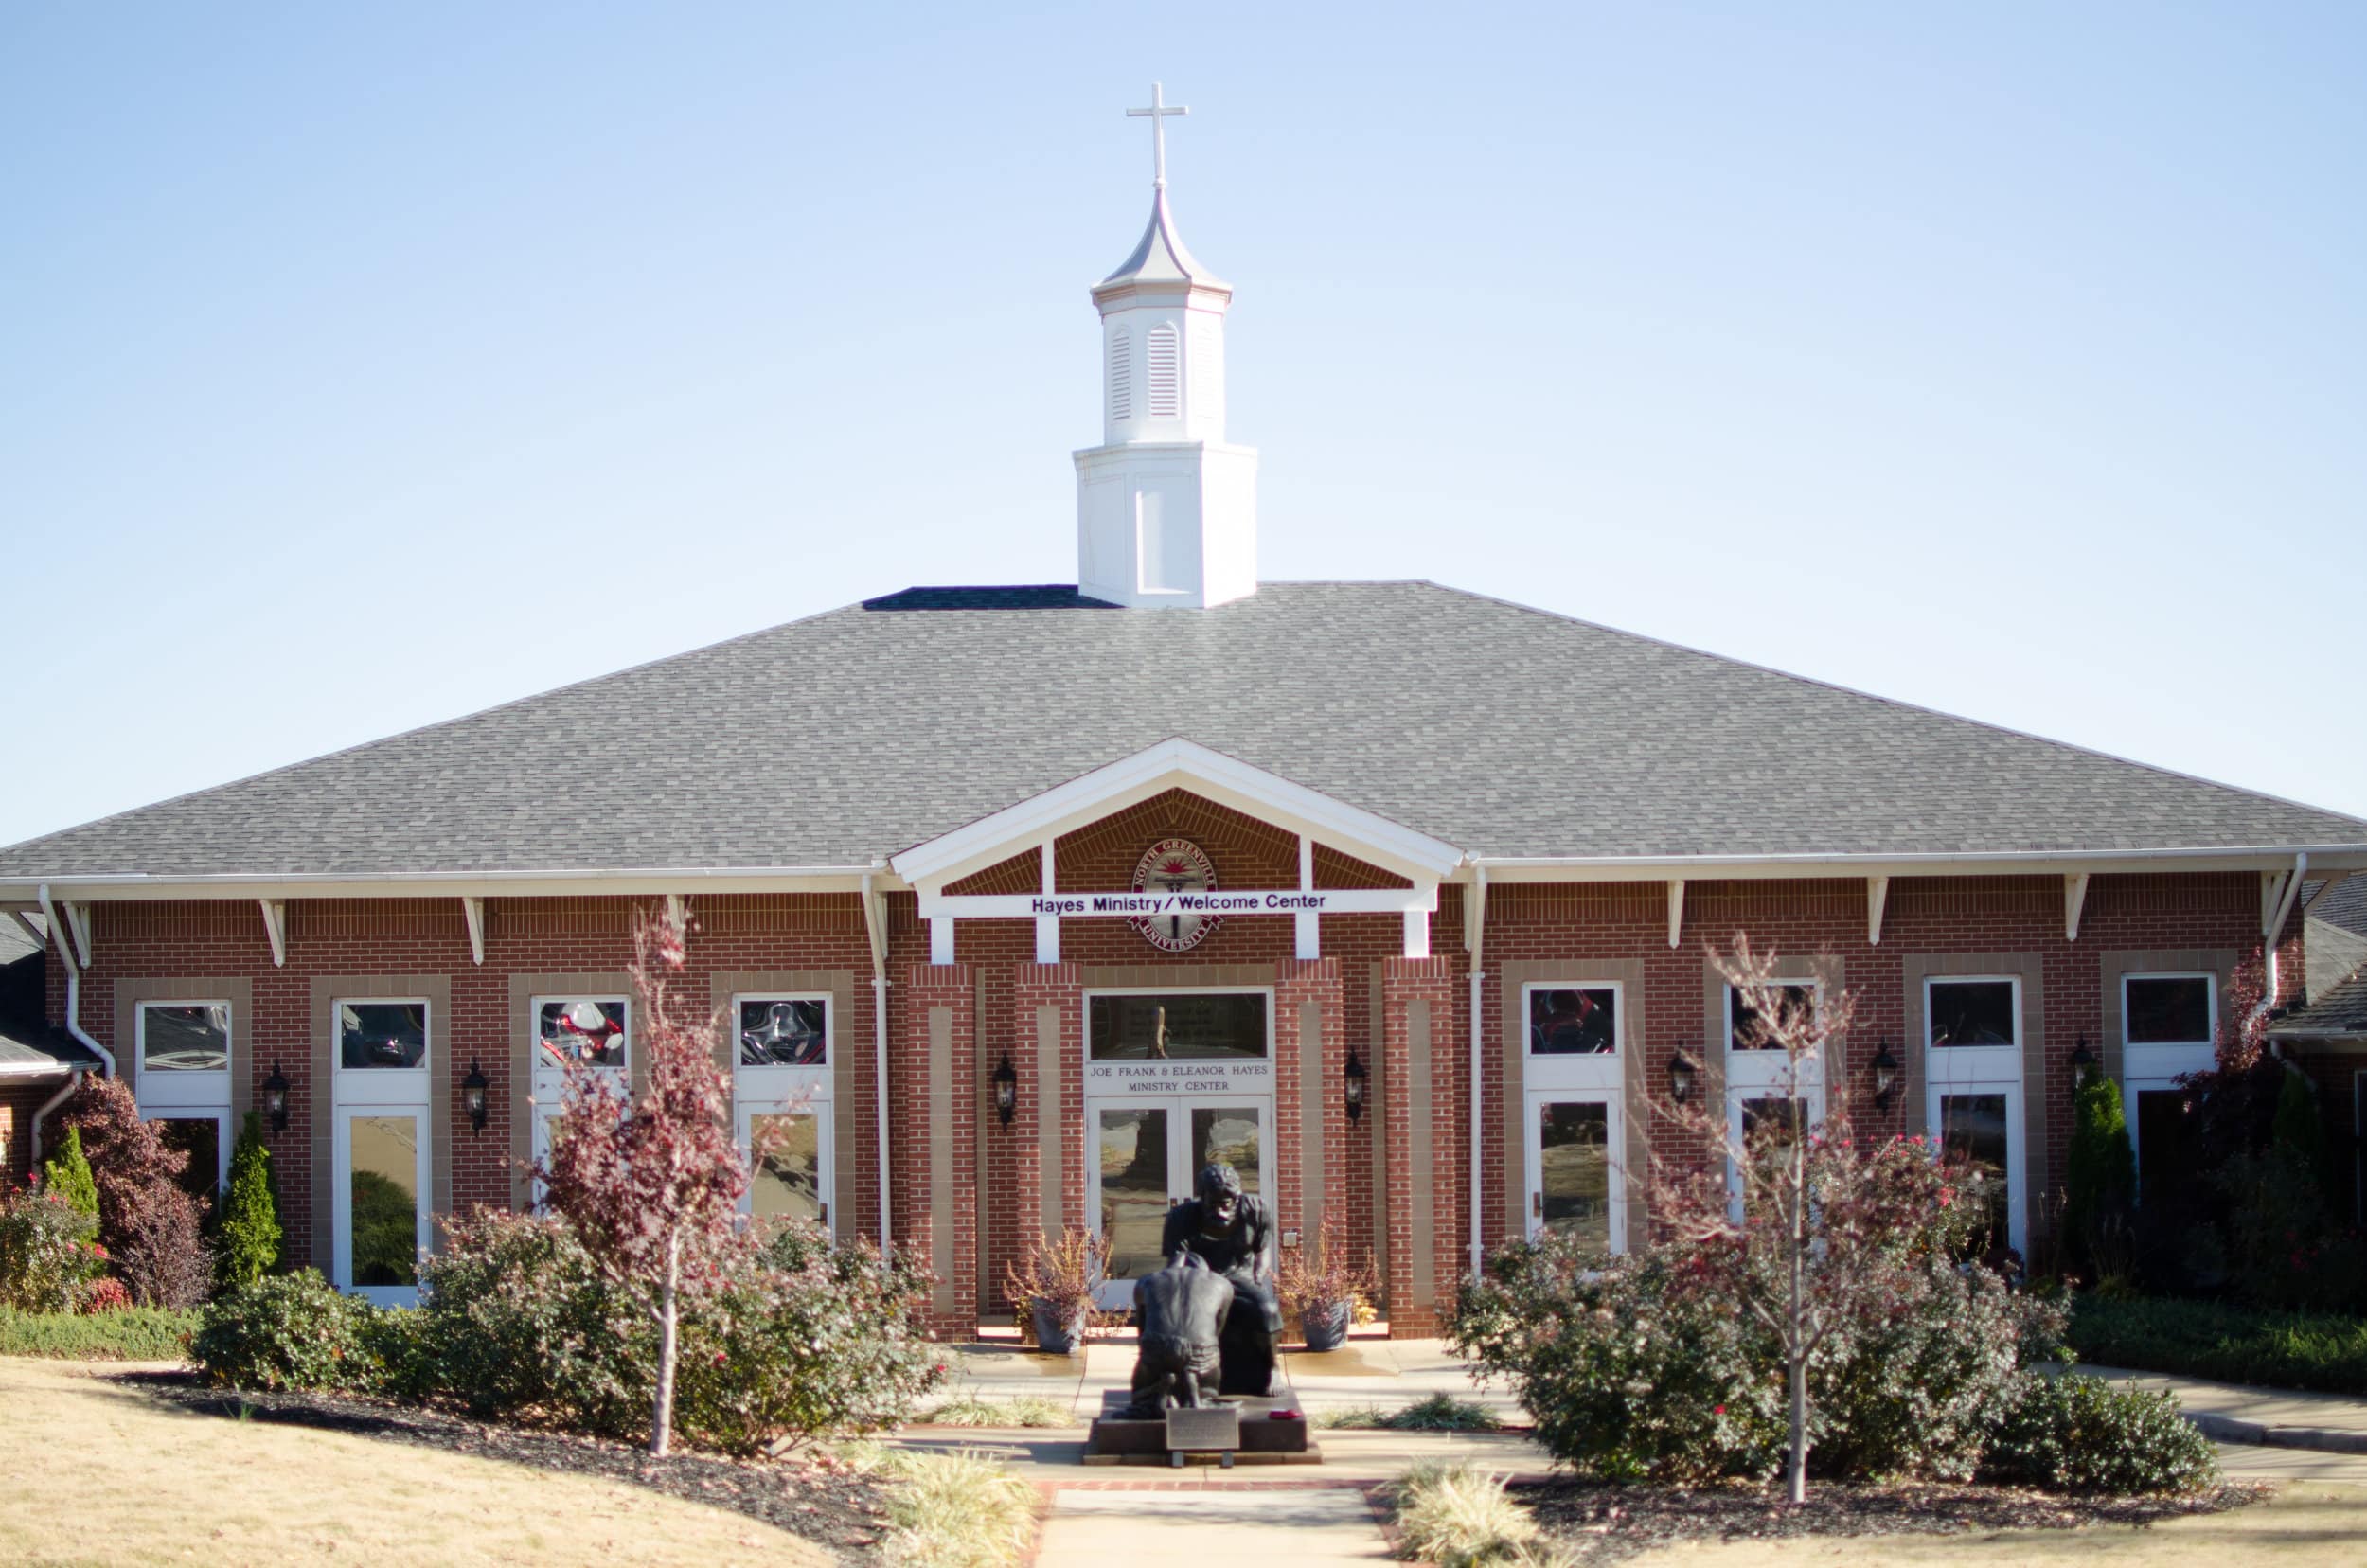 Hayes Ministry is the face of North Greenville University. It's the first building you see when entering campus and where the admissions office is located. You will also occasionally find events going on such as Coffee House and meetings. When you t